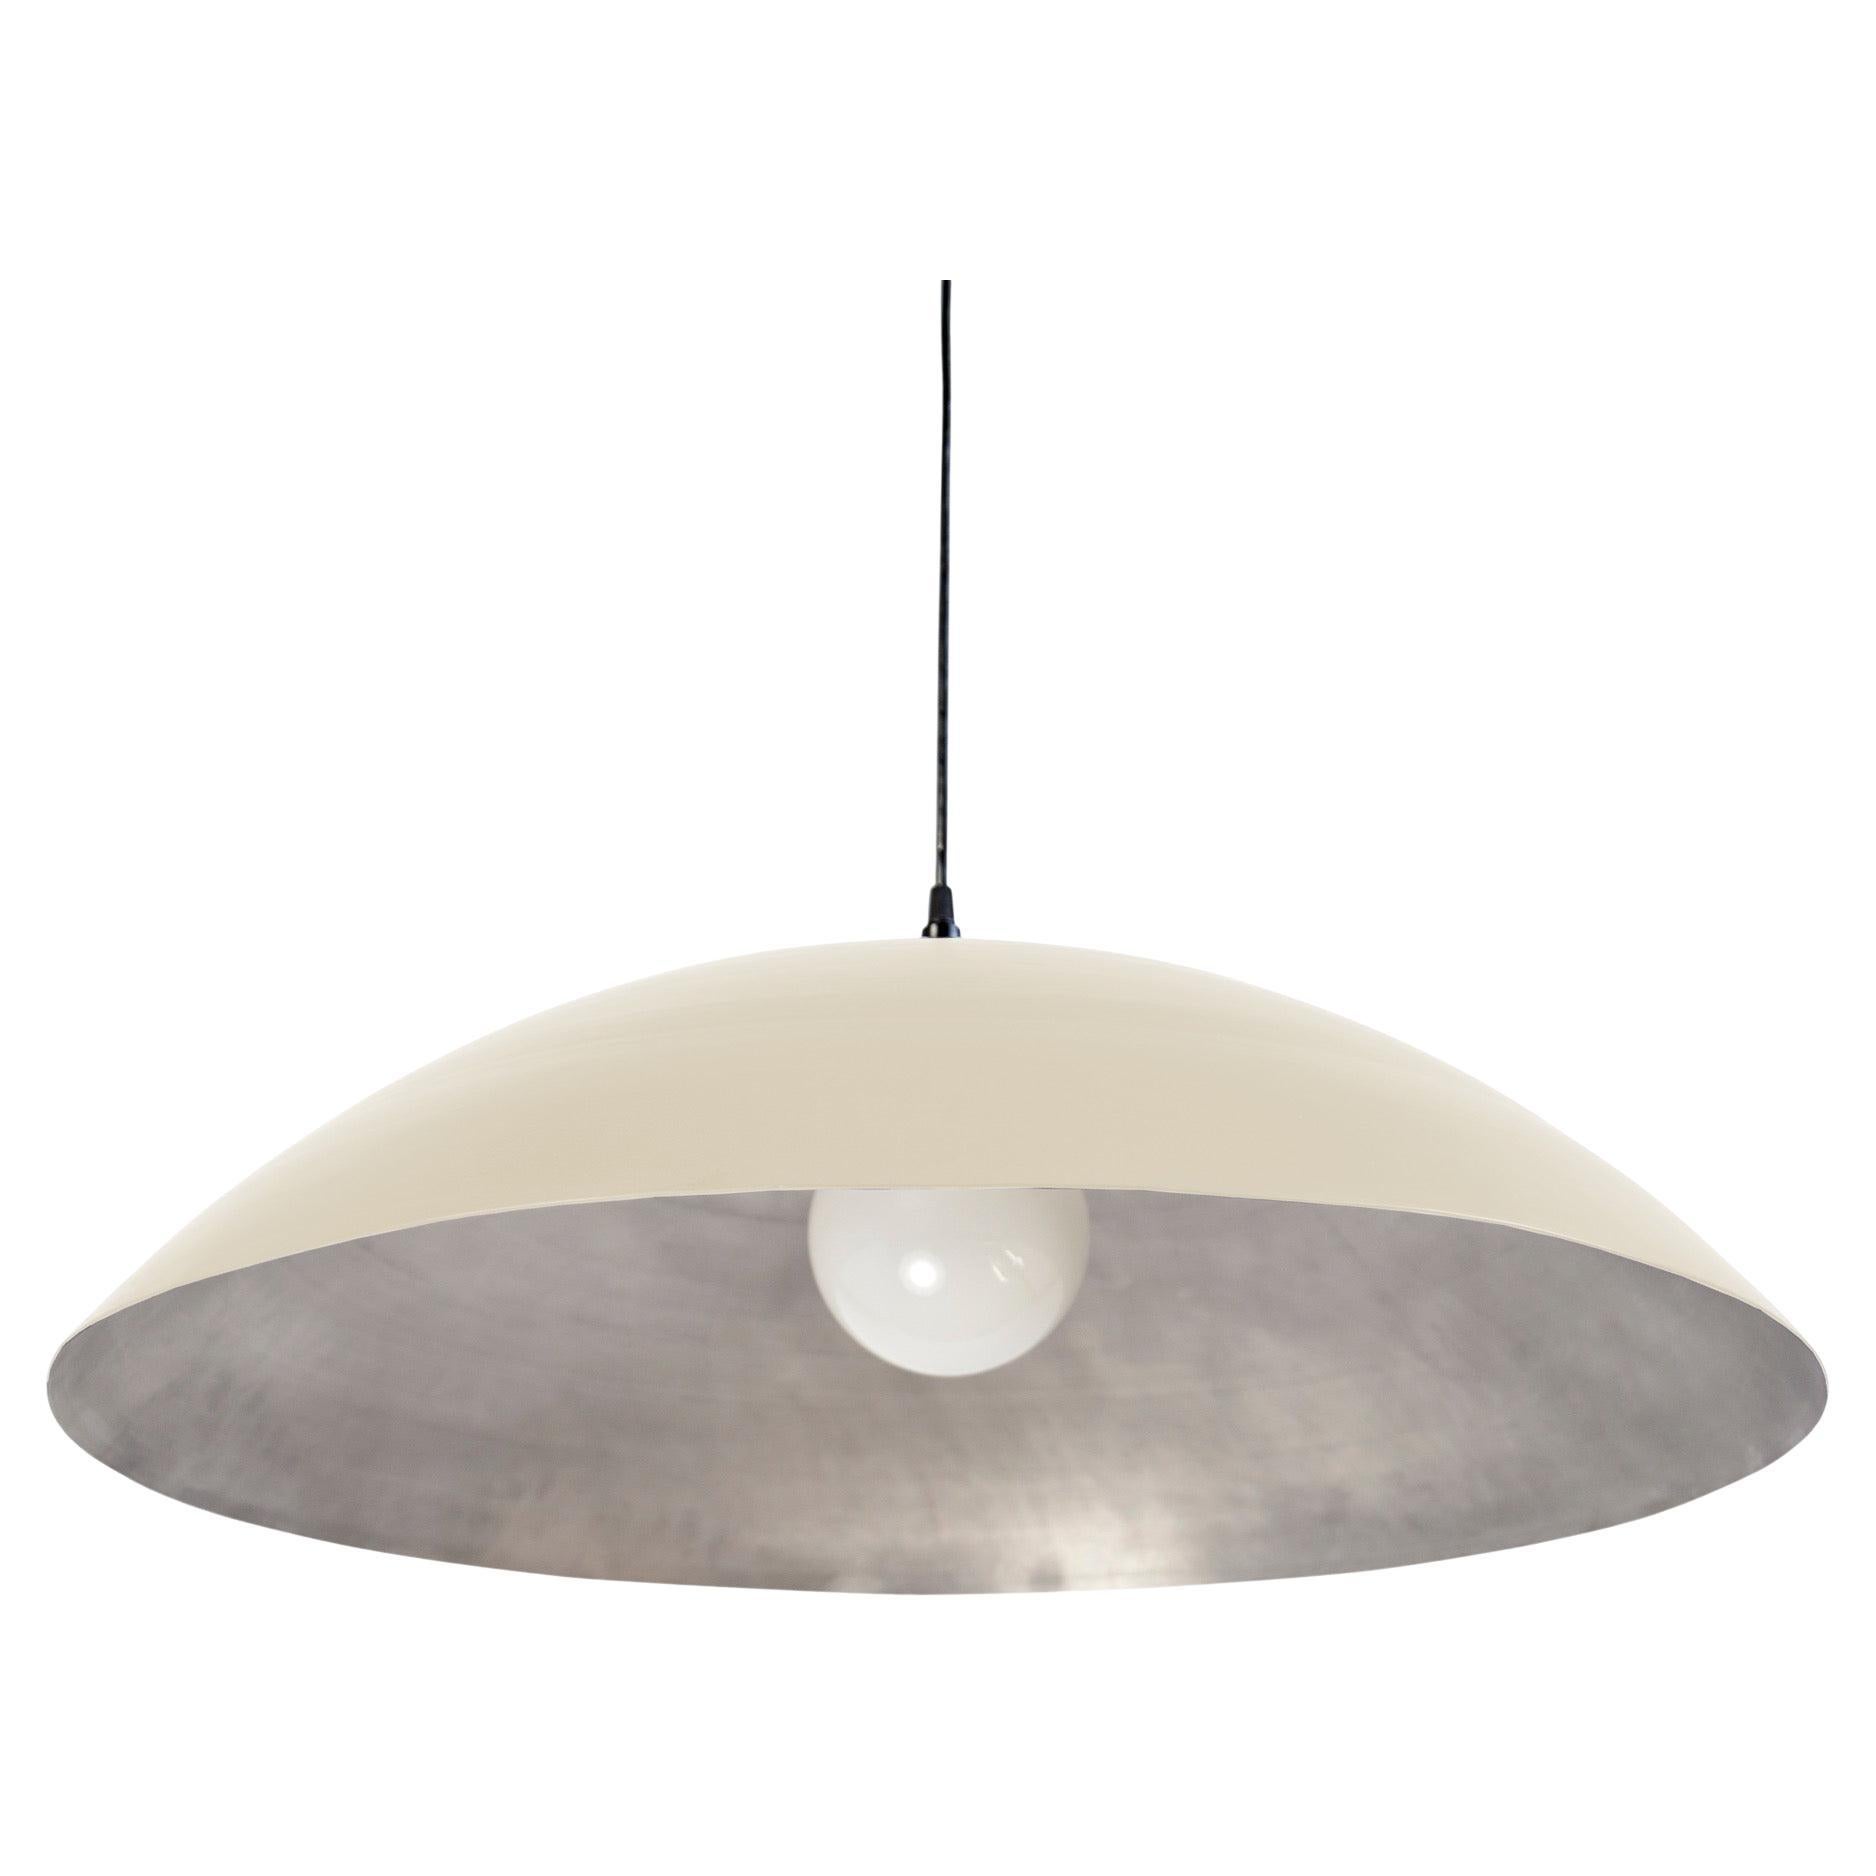 Customizable Oversized Pendant by RESEARCH Lighting, Flat Cream & Silver, MTO